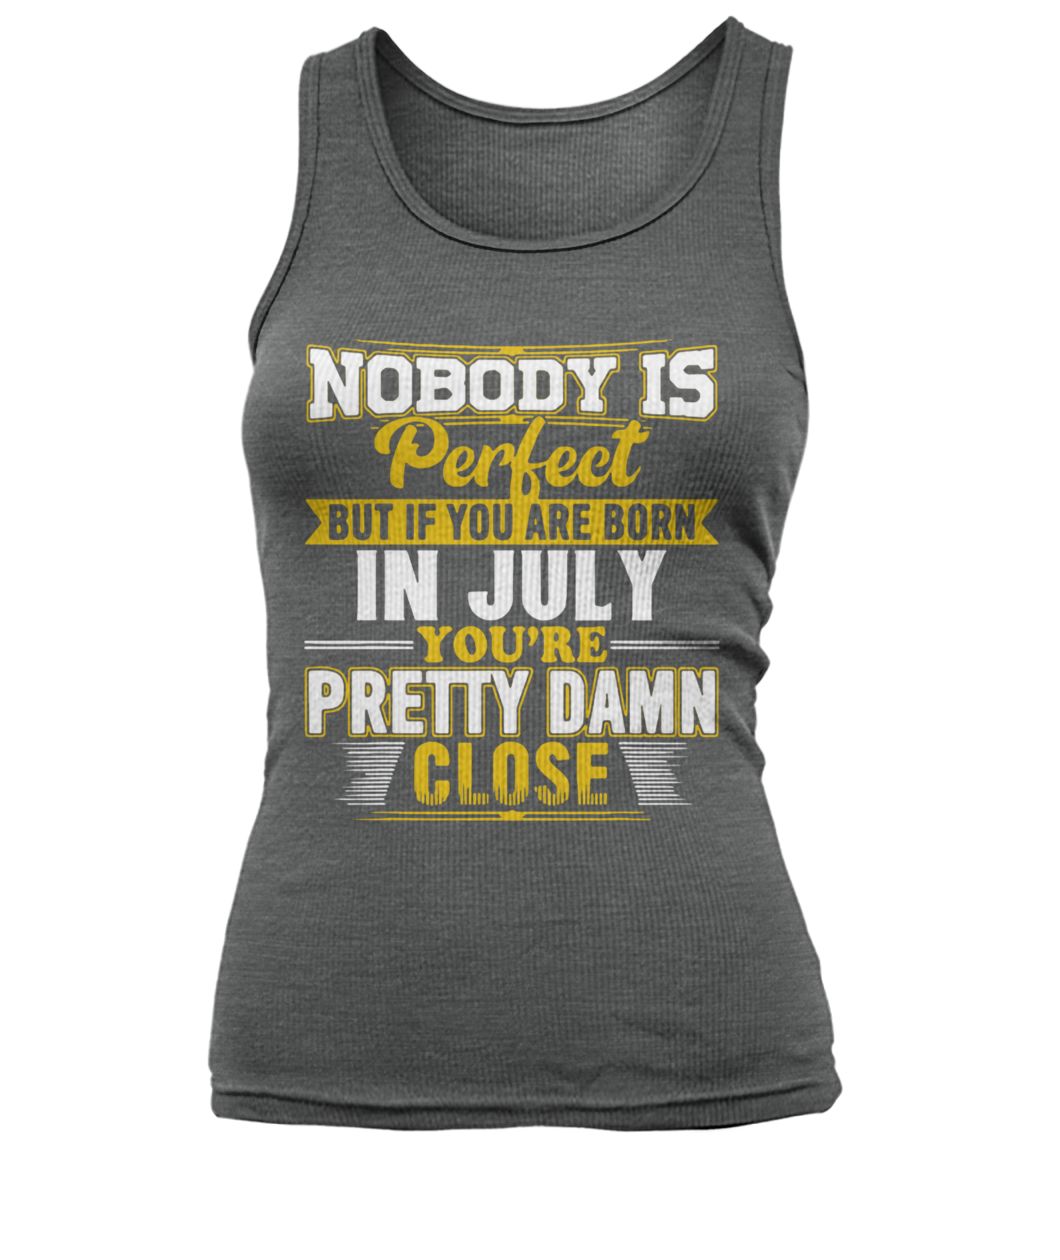 Nobody is perfect but if you are born in July you're pretty damn close women's tank top